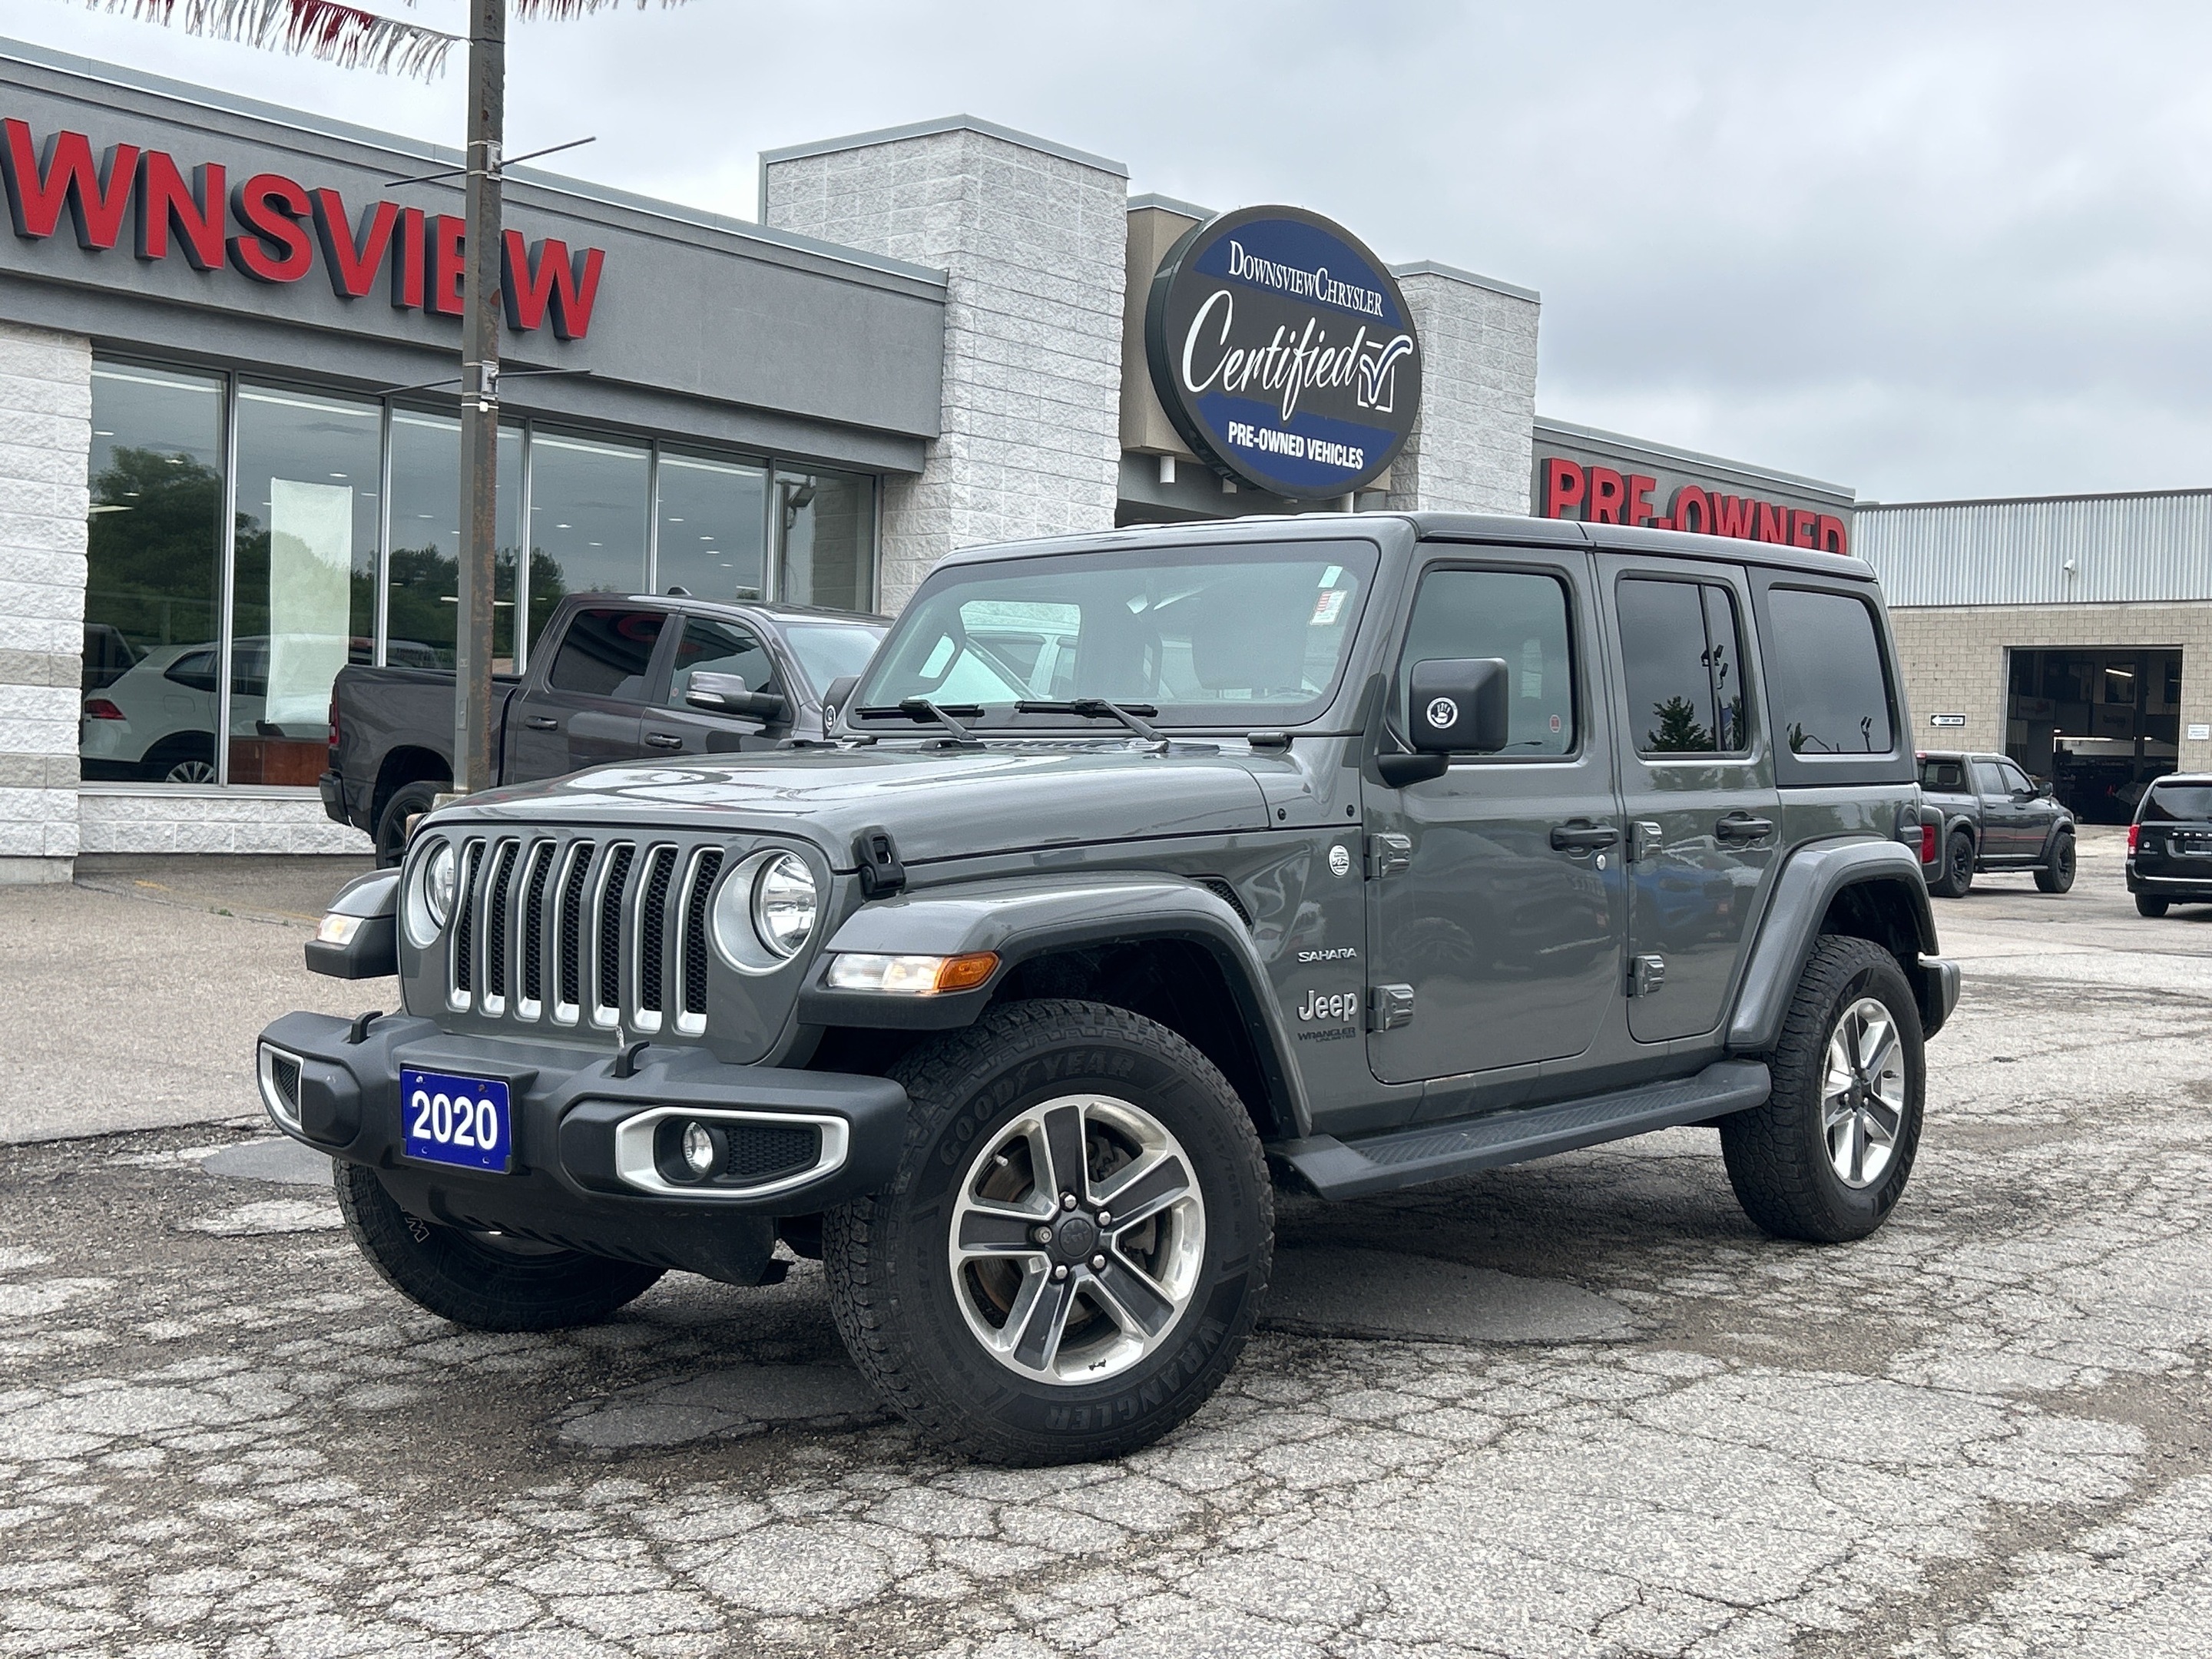 2020 Jeep WRANGLER UNLIMITED Sahara 4x4, Nav., Cold Weather Group